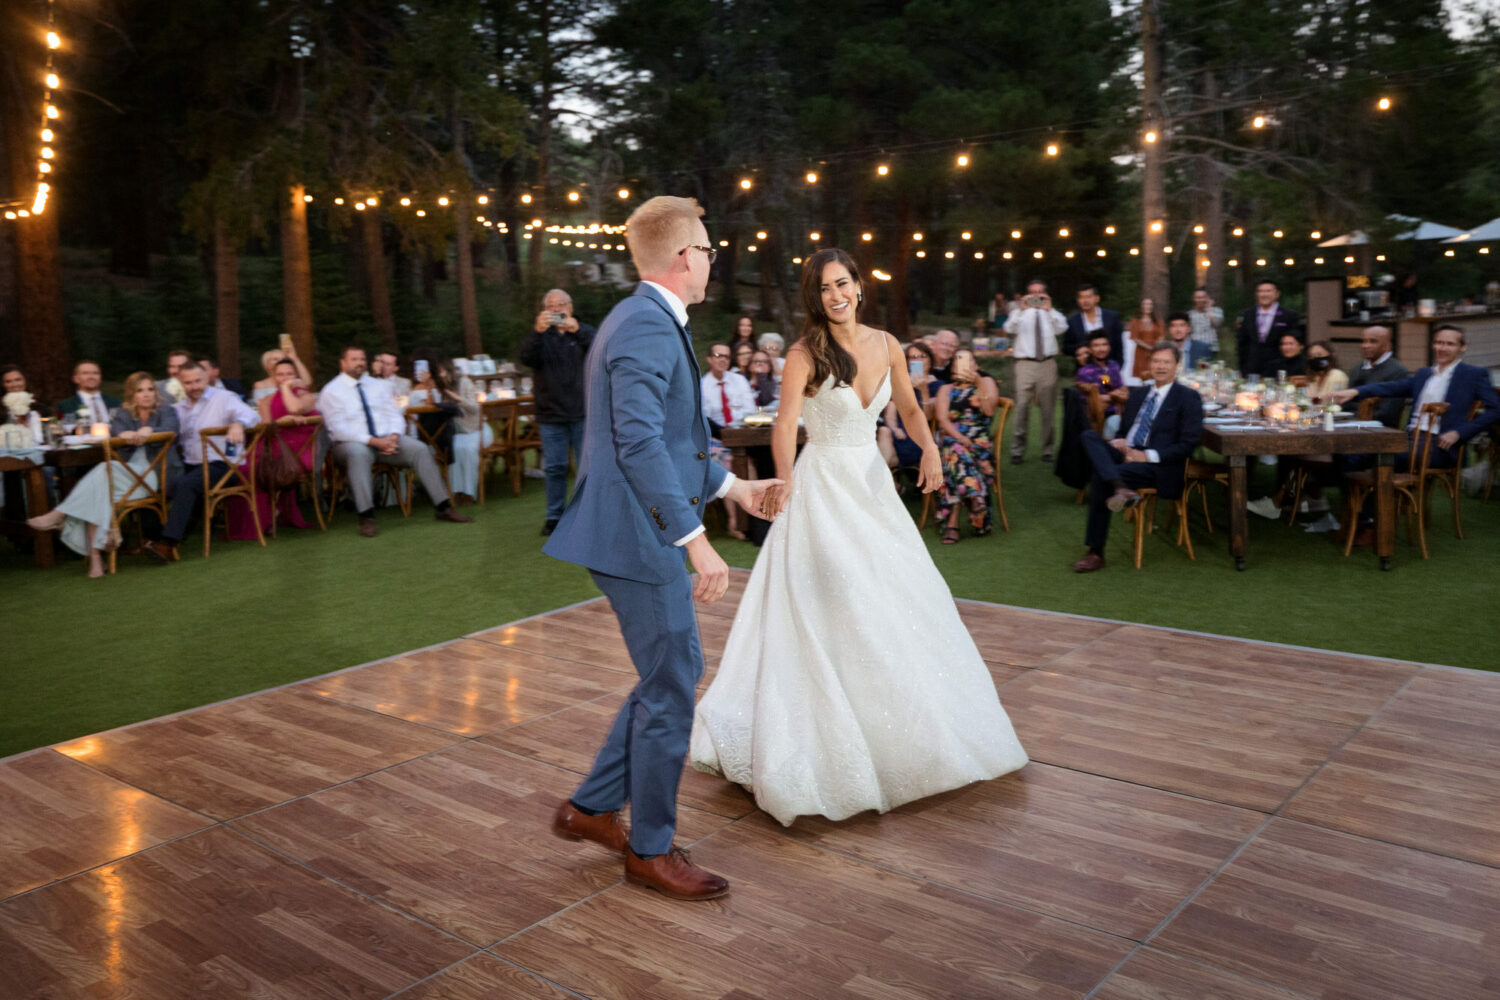 There is plenty of room for a dance floor at the large outdoor reception lawn.